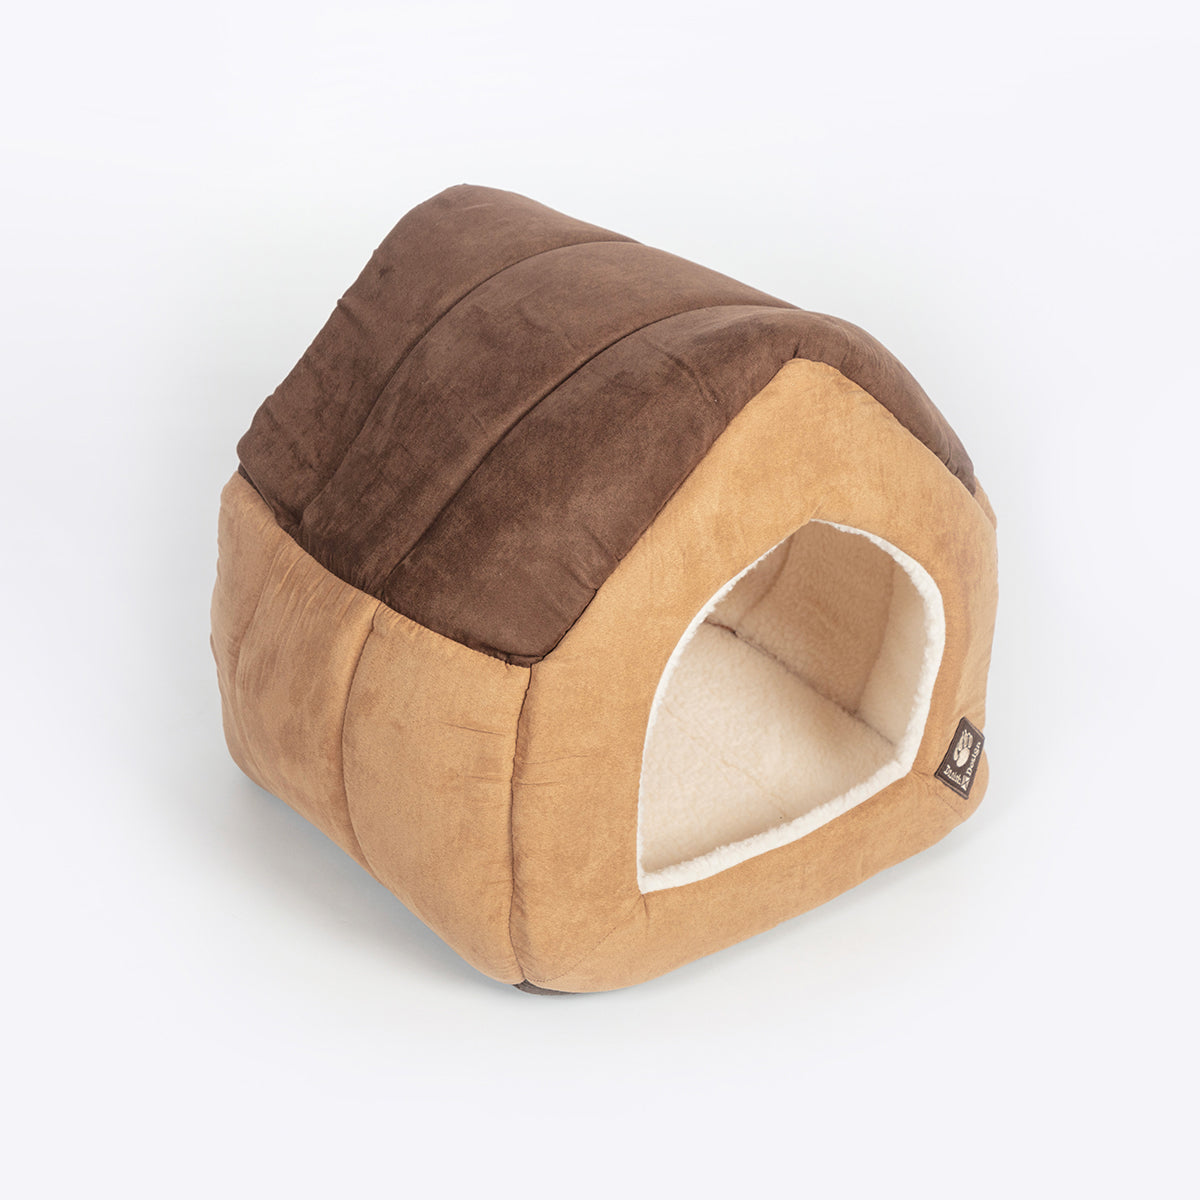 Image of Danish Design Pet House For Small Dogs - Beige - Small House